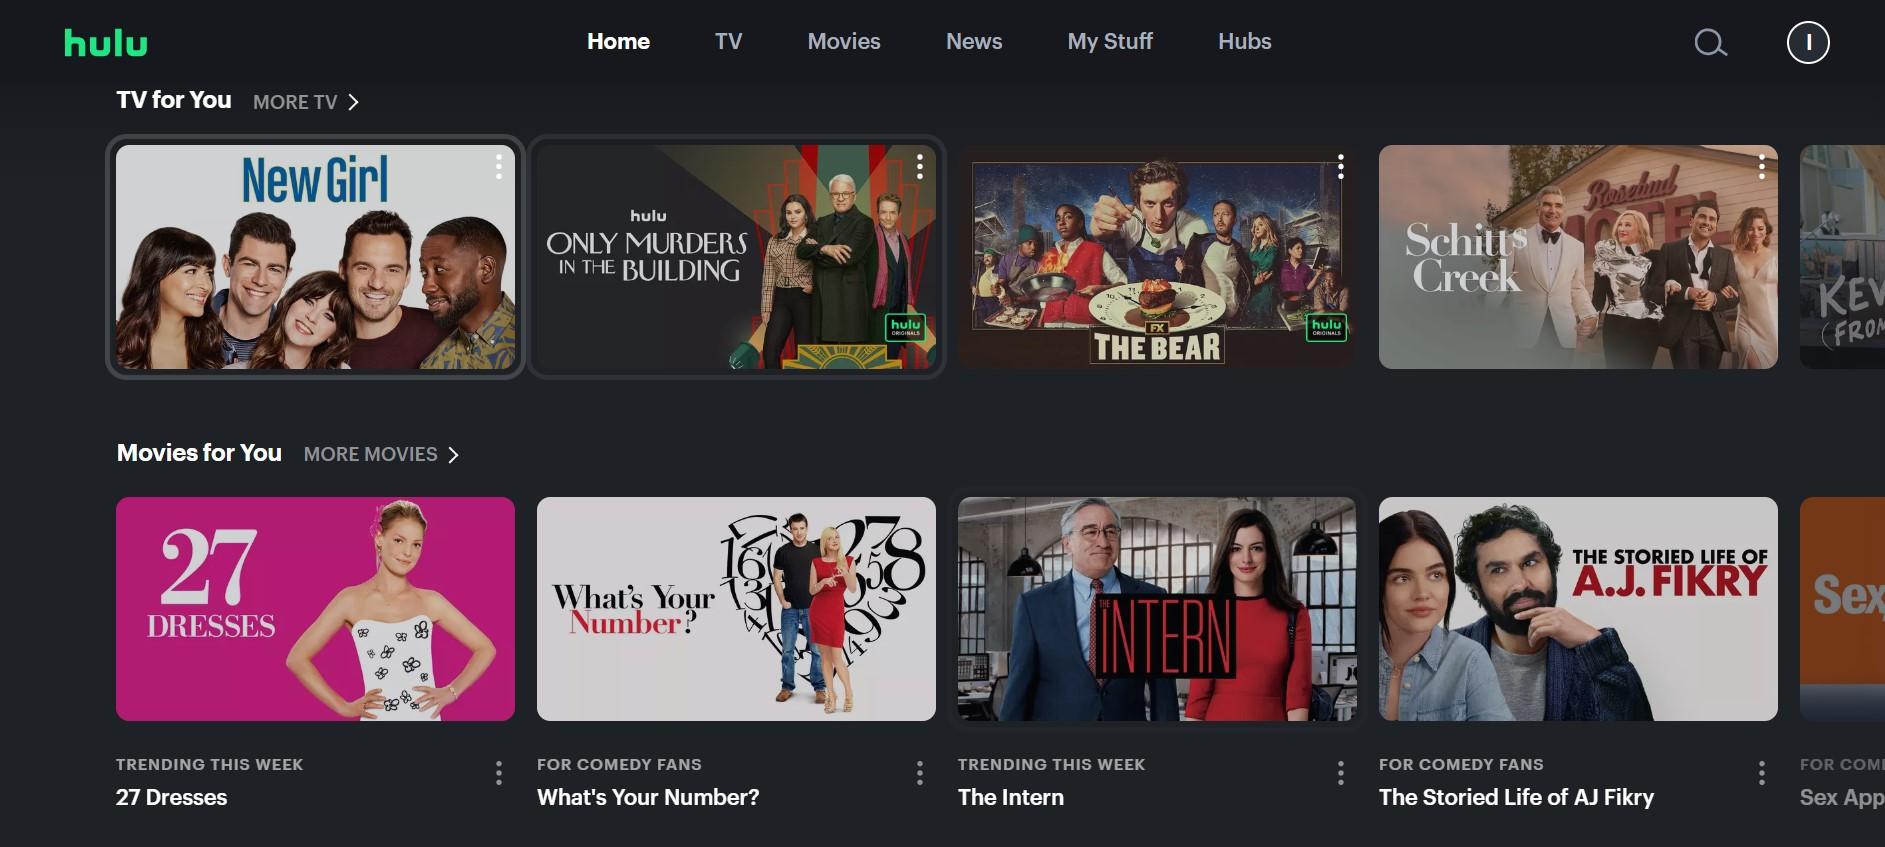 Hulu in Turkey - tv shows and movies